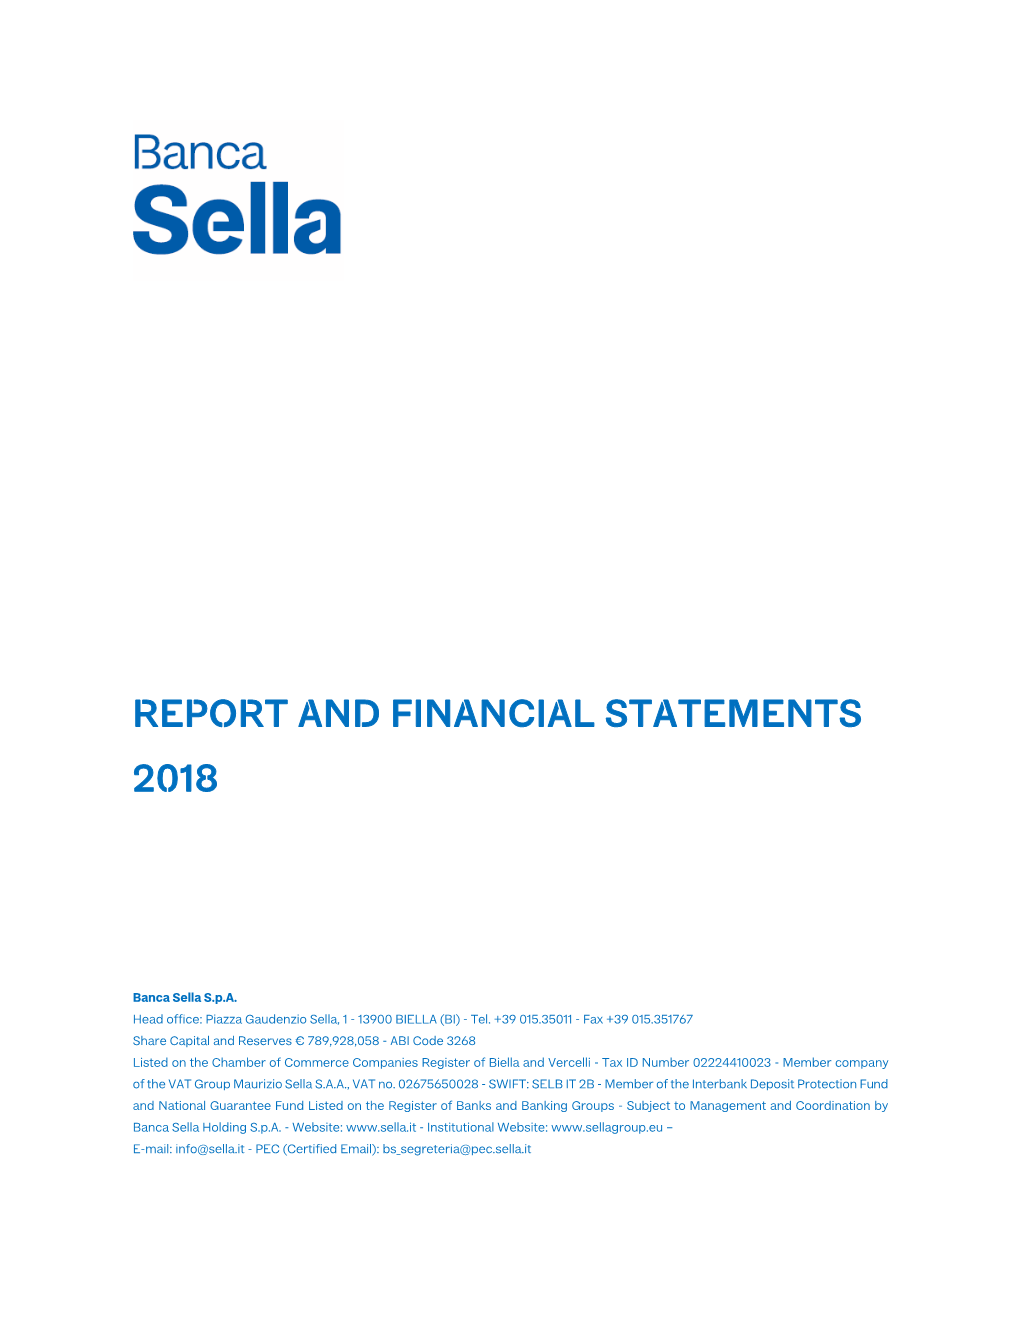 Report and Financial Statements 2018